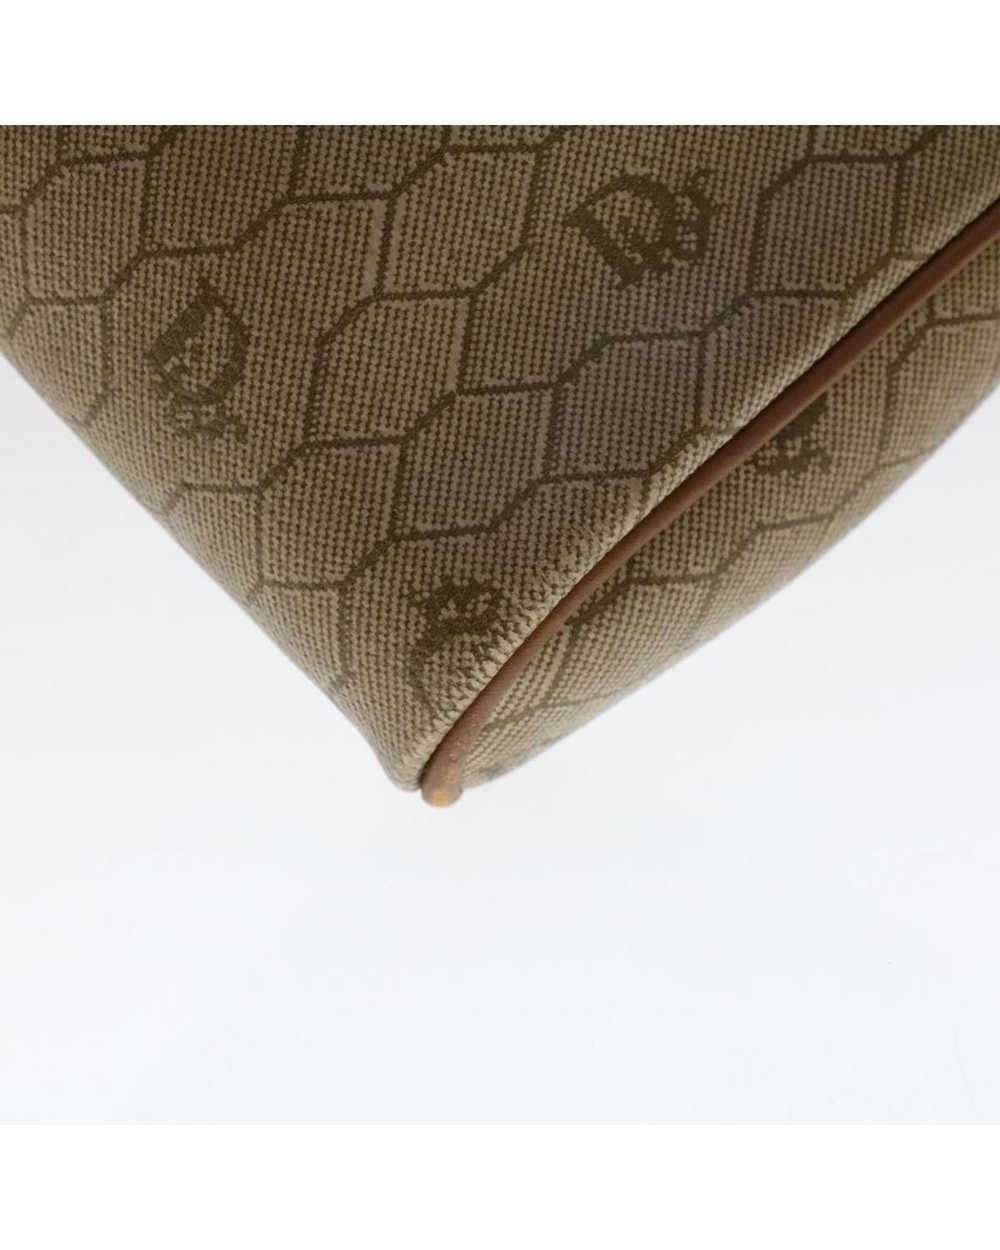 Dior Honeycomb Canvas Clutch by Dior - image 8